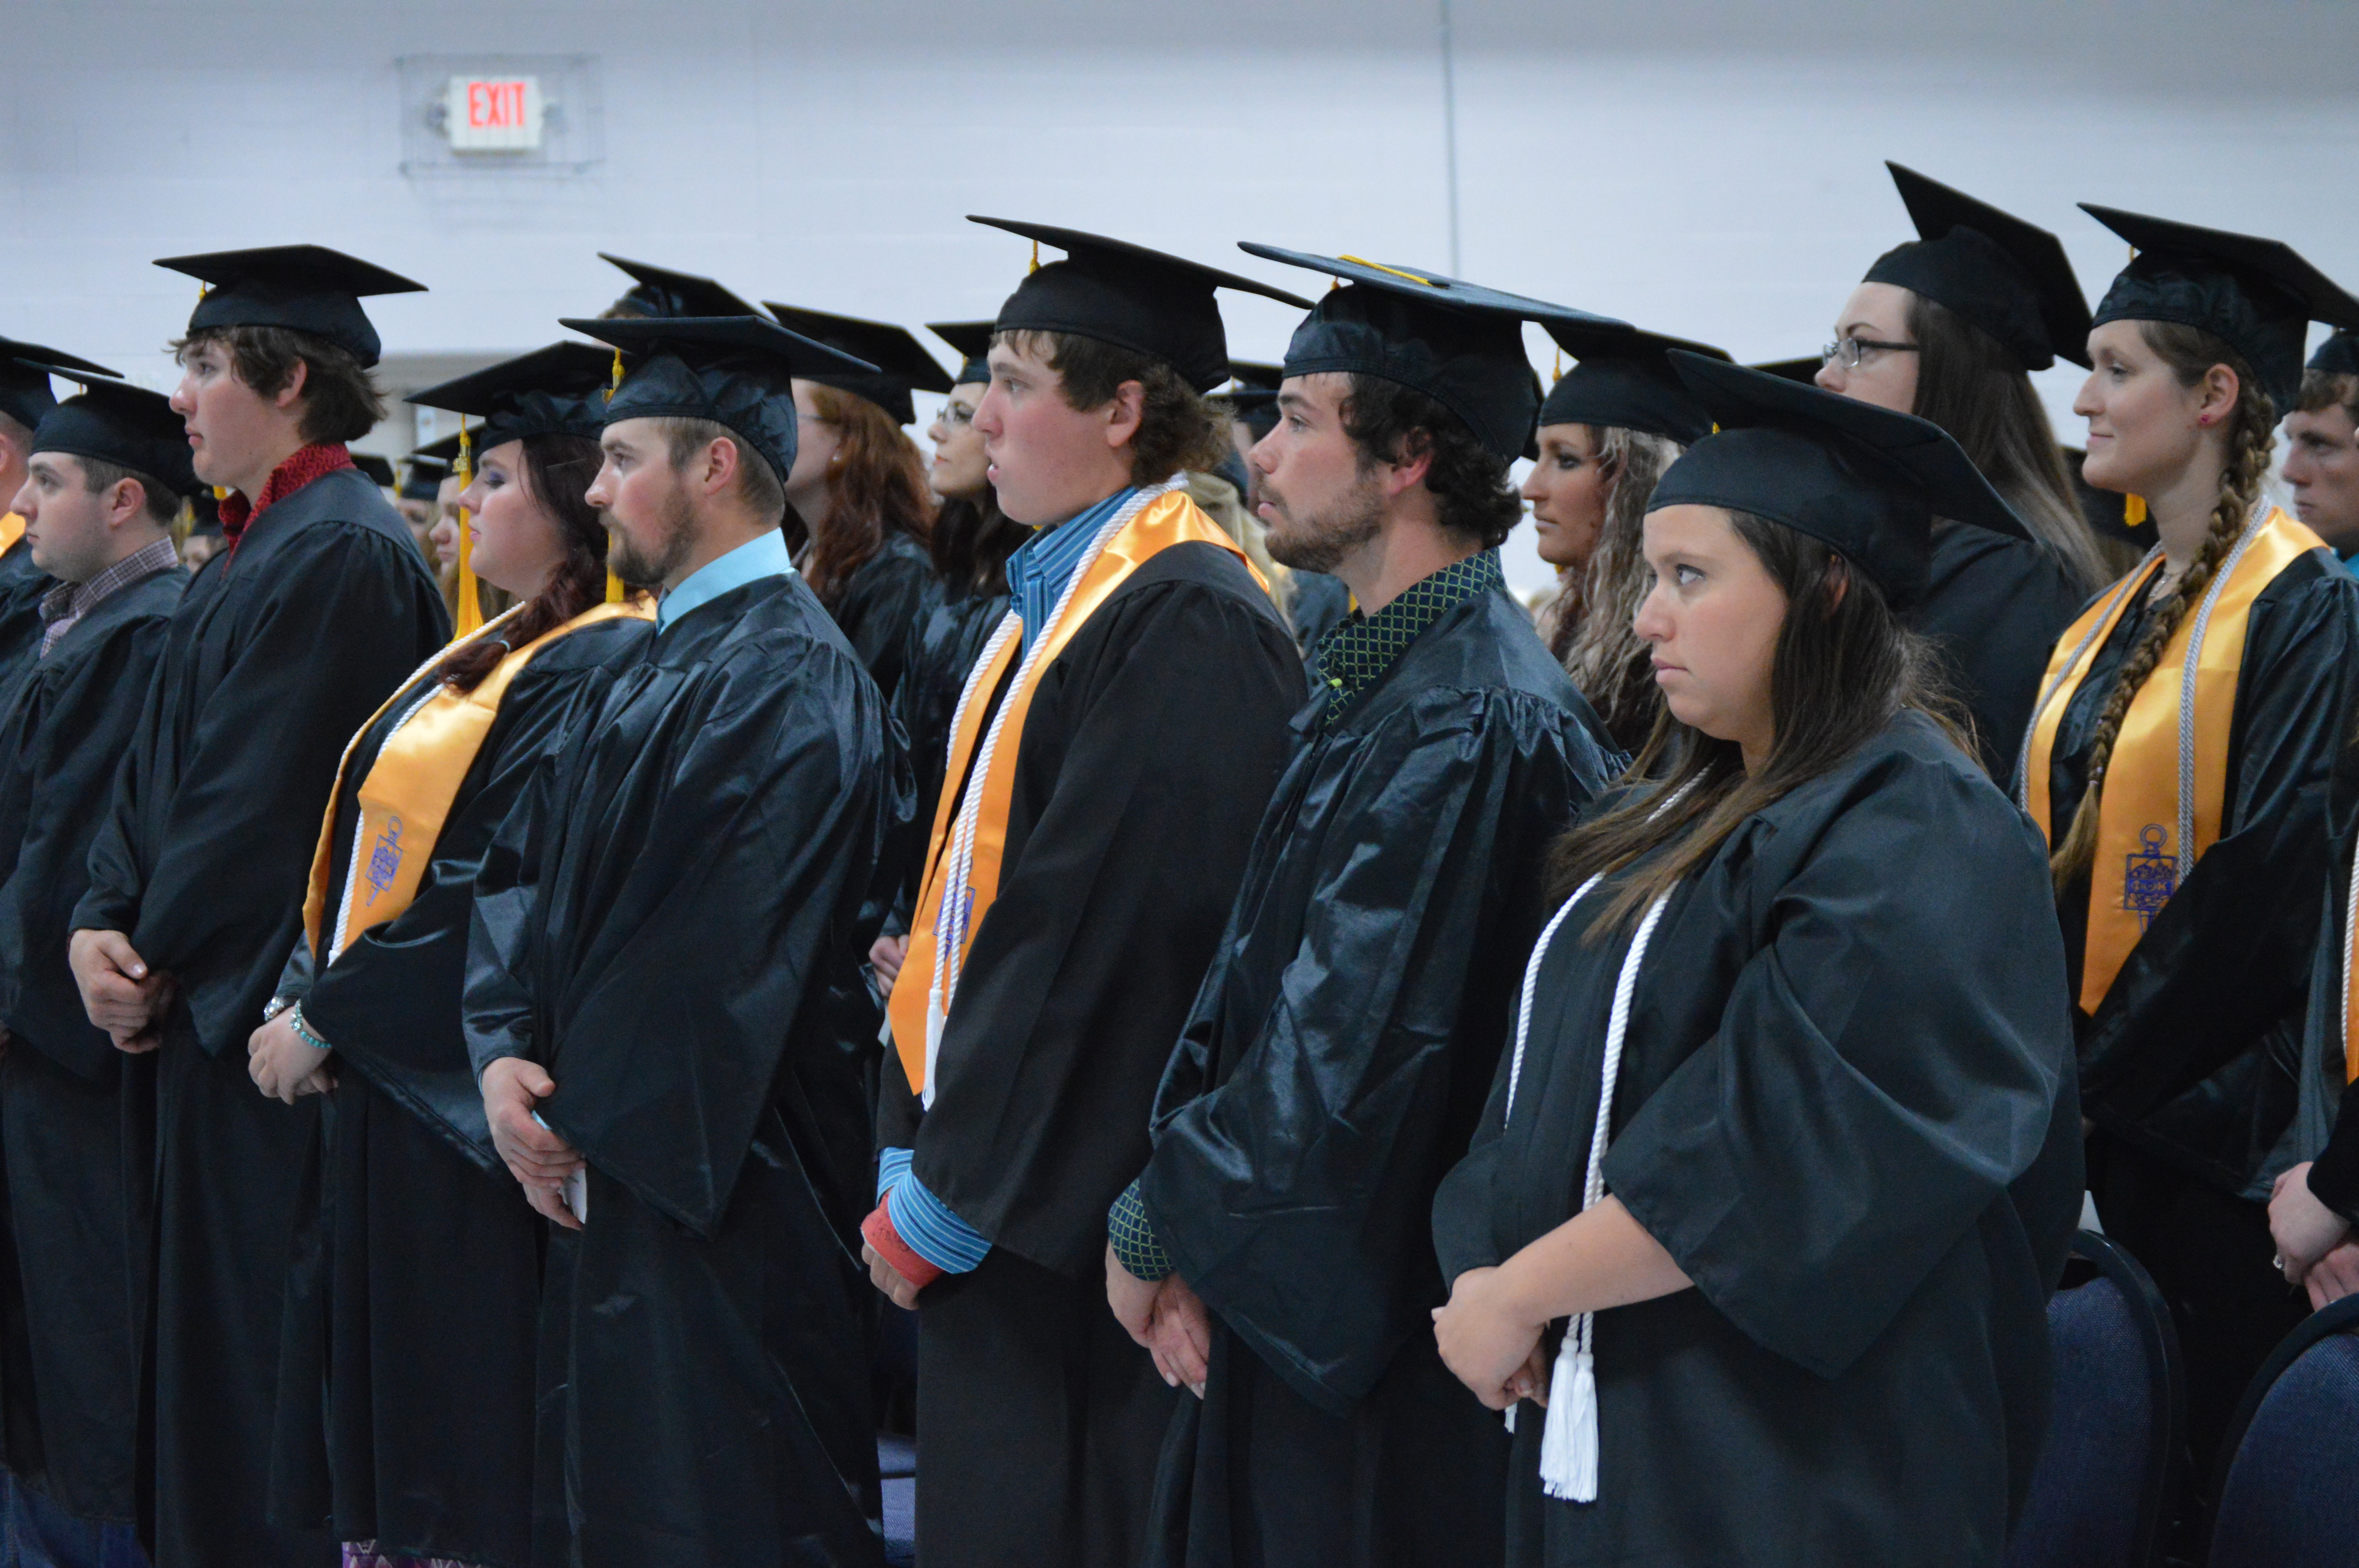 NCTA Class of 2016 graduates rise to move their tassels on their mortarboards from right to left. Governor Pete Ricketts was a keynote speaker for the May 5 commencement in Curtis. (NCTA photo)